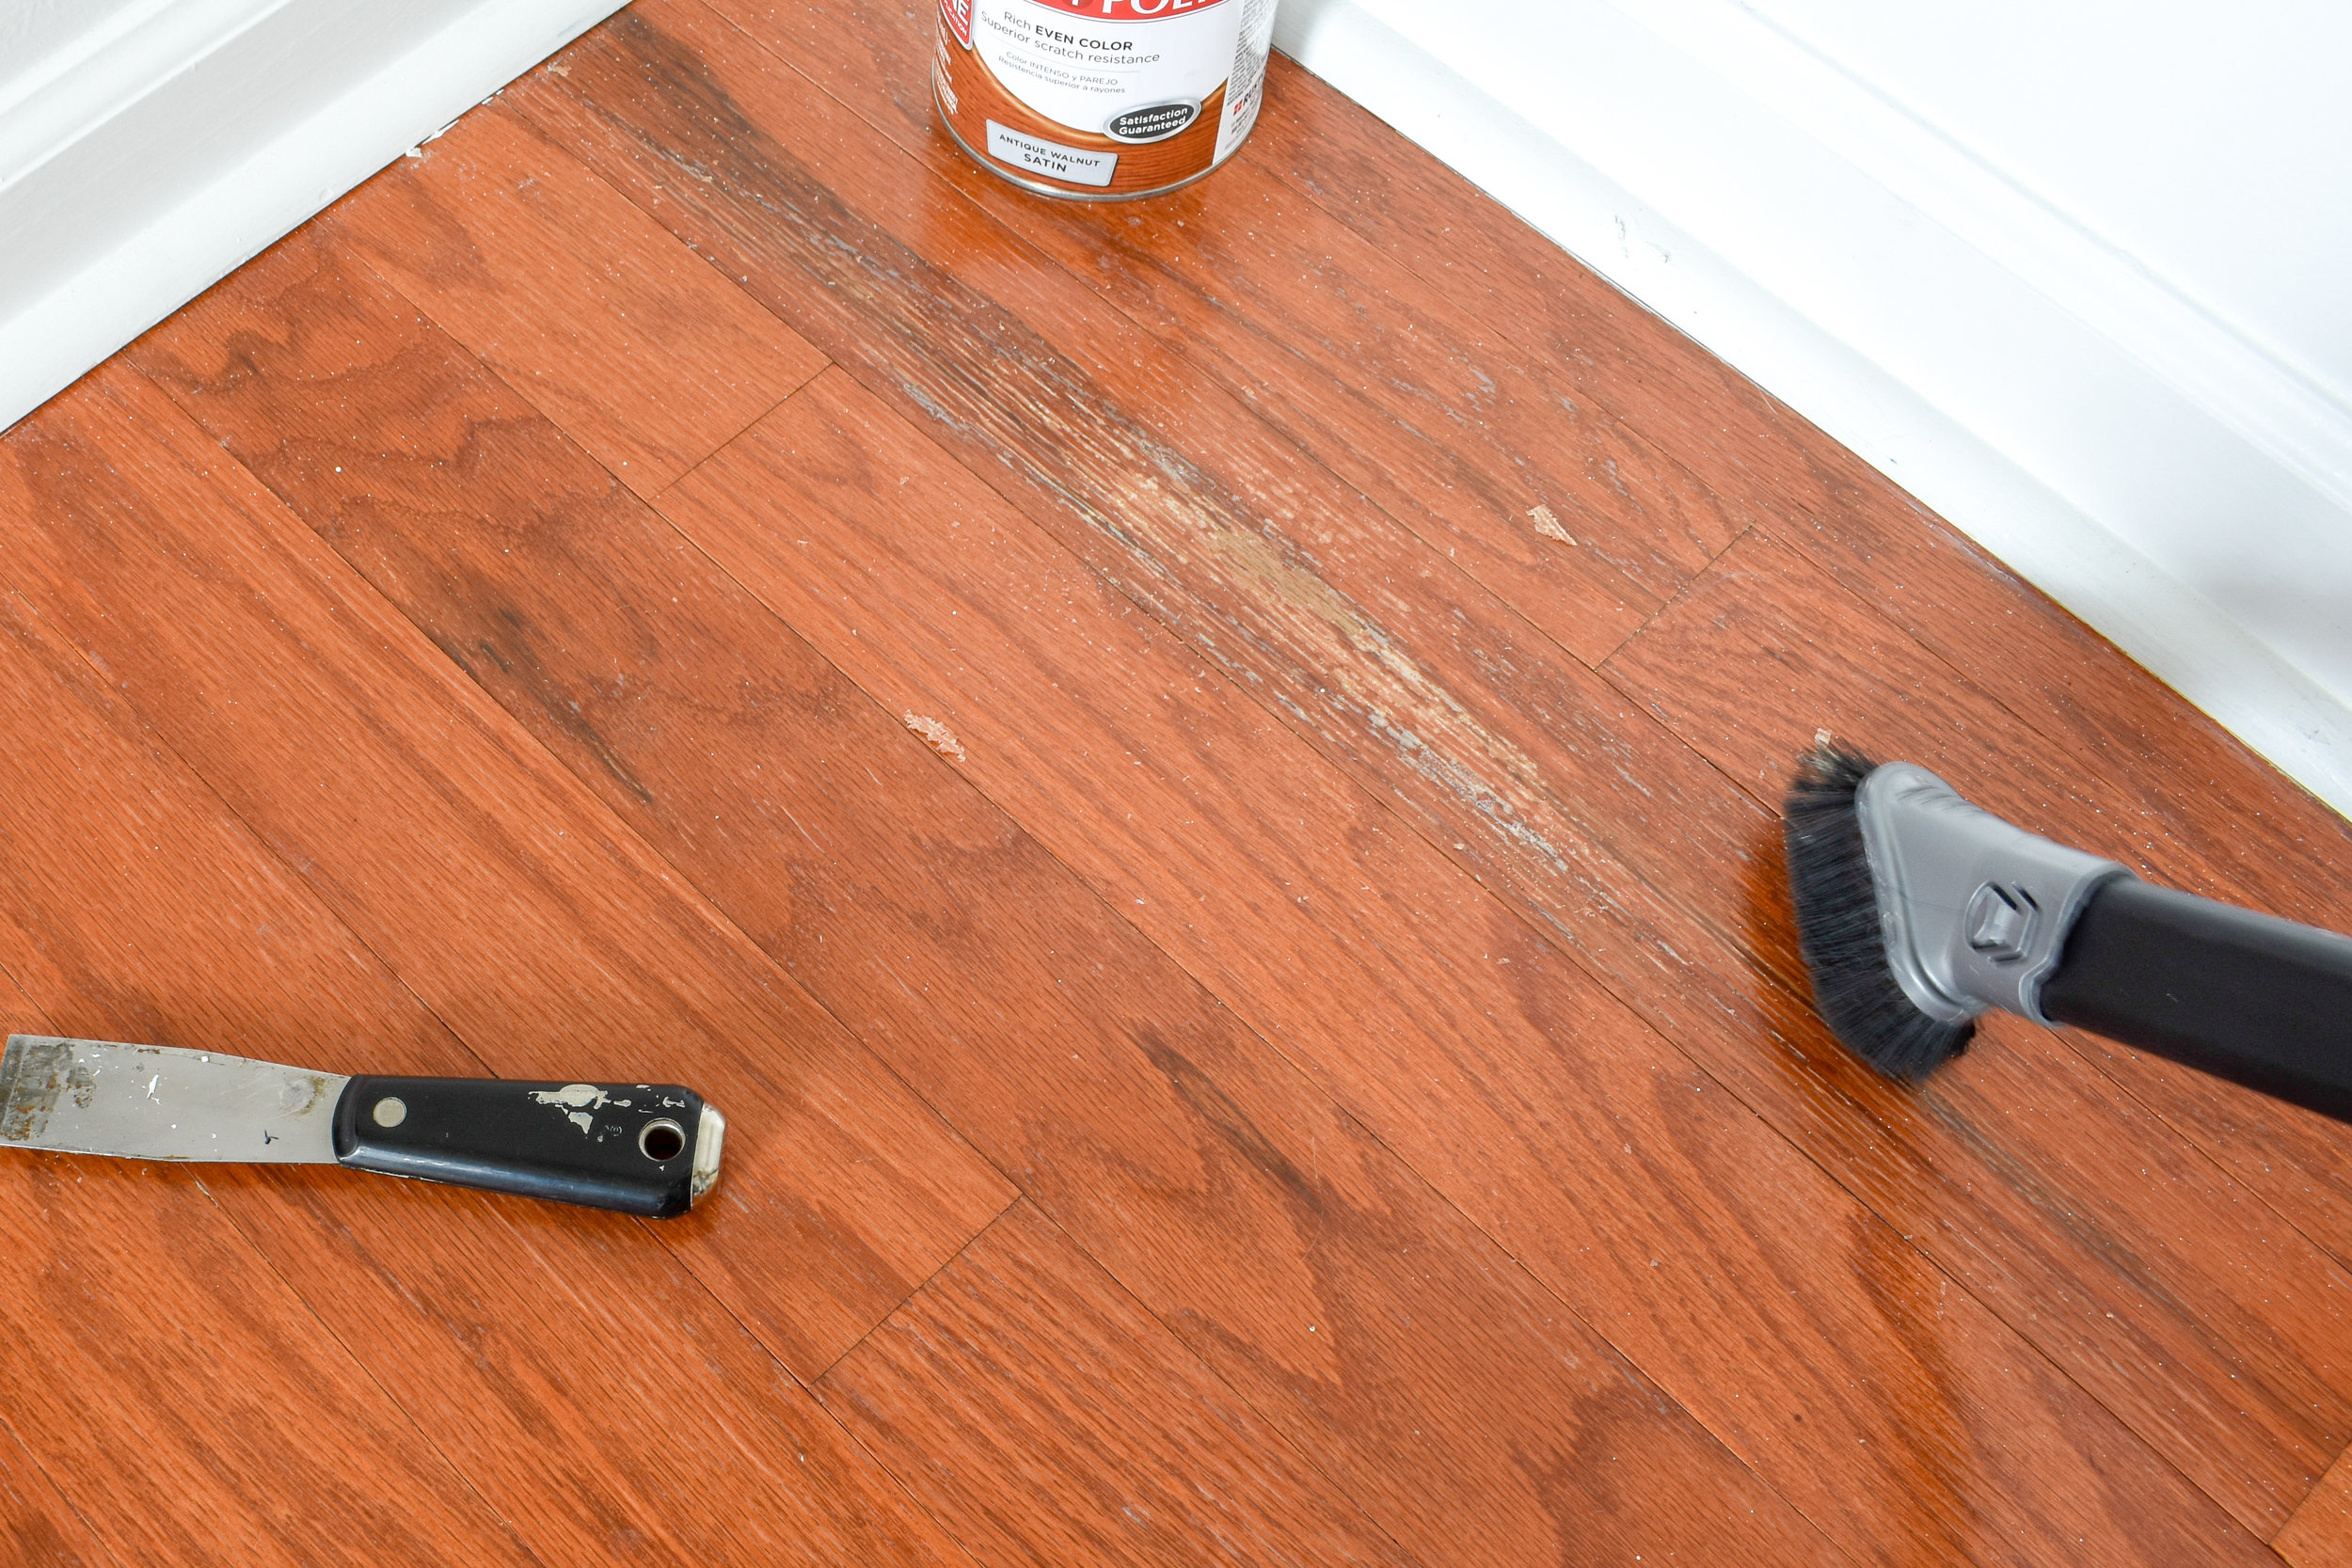 Repairing water damage to prefinished hardwood flooring - how to know if the damage is surface damage or actual wood rot. #hardwoodfloors #flooringmaintenance #flooringrepair